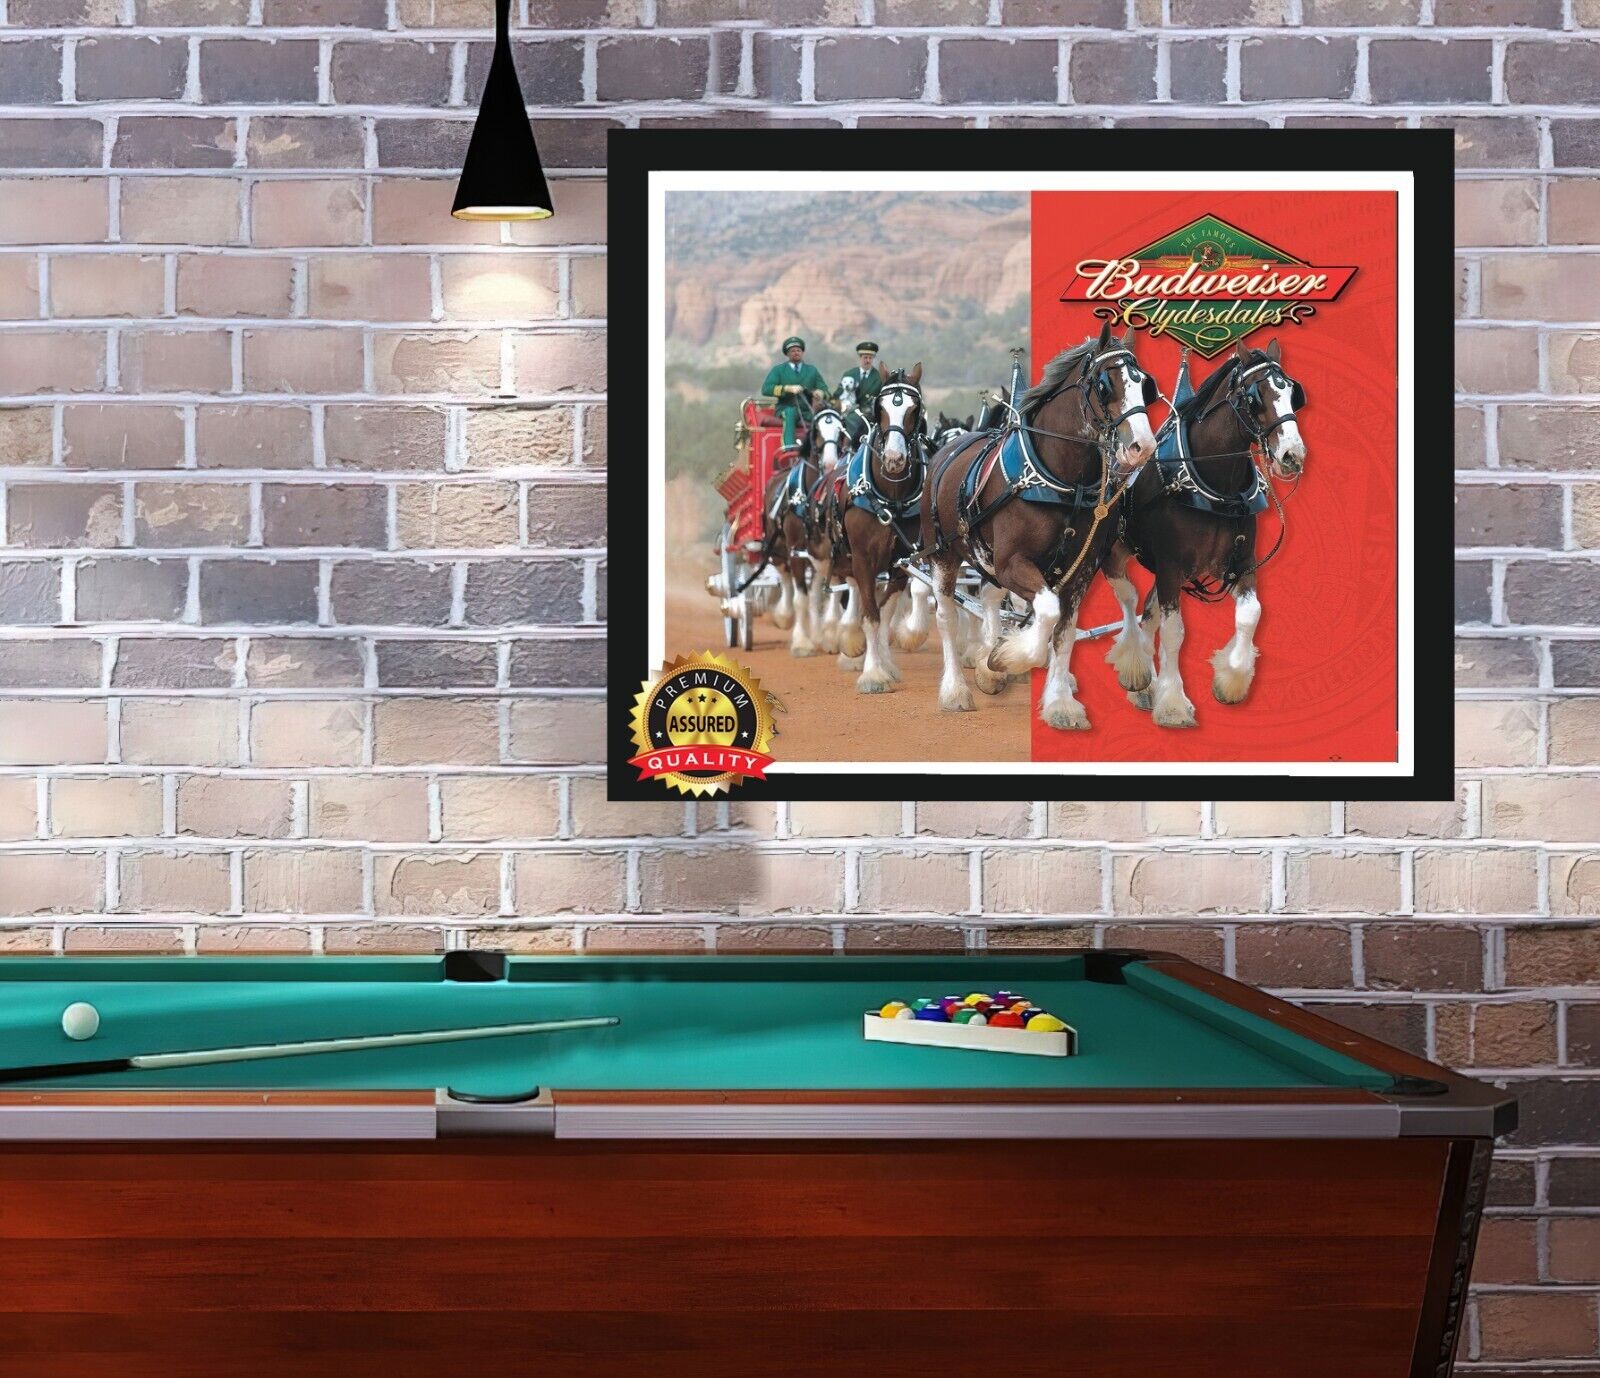 Budweiser - Clydesdales - Rare - King of Beers - Metal Sign 11 x 14